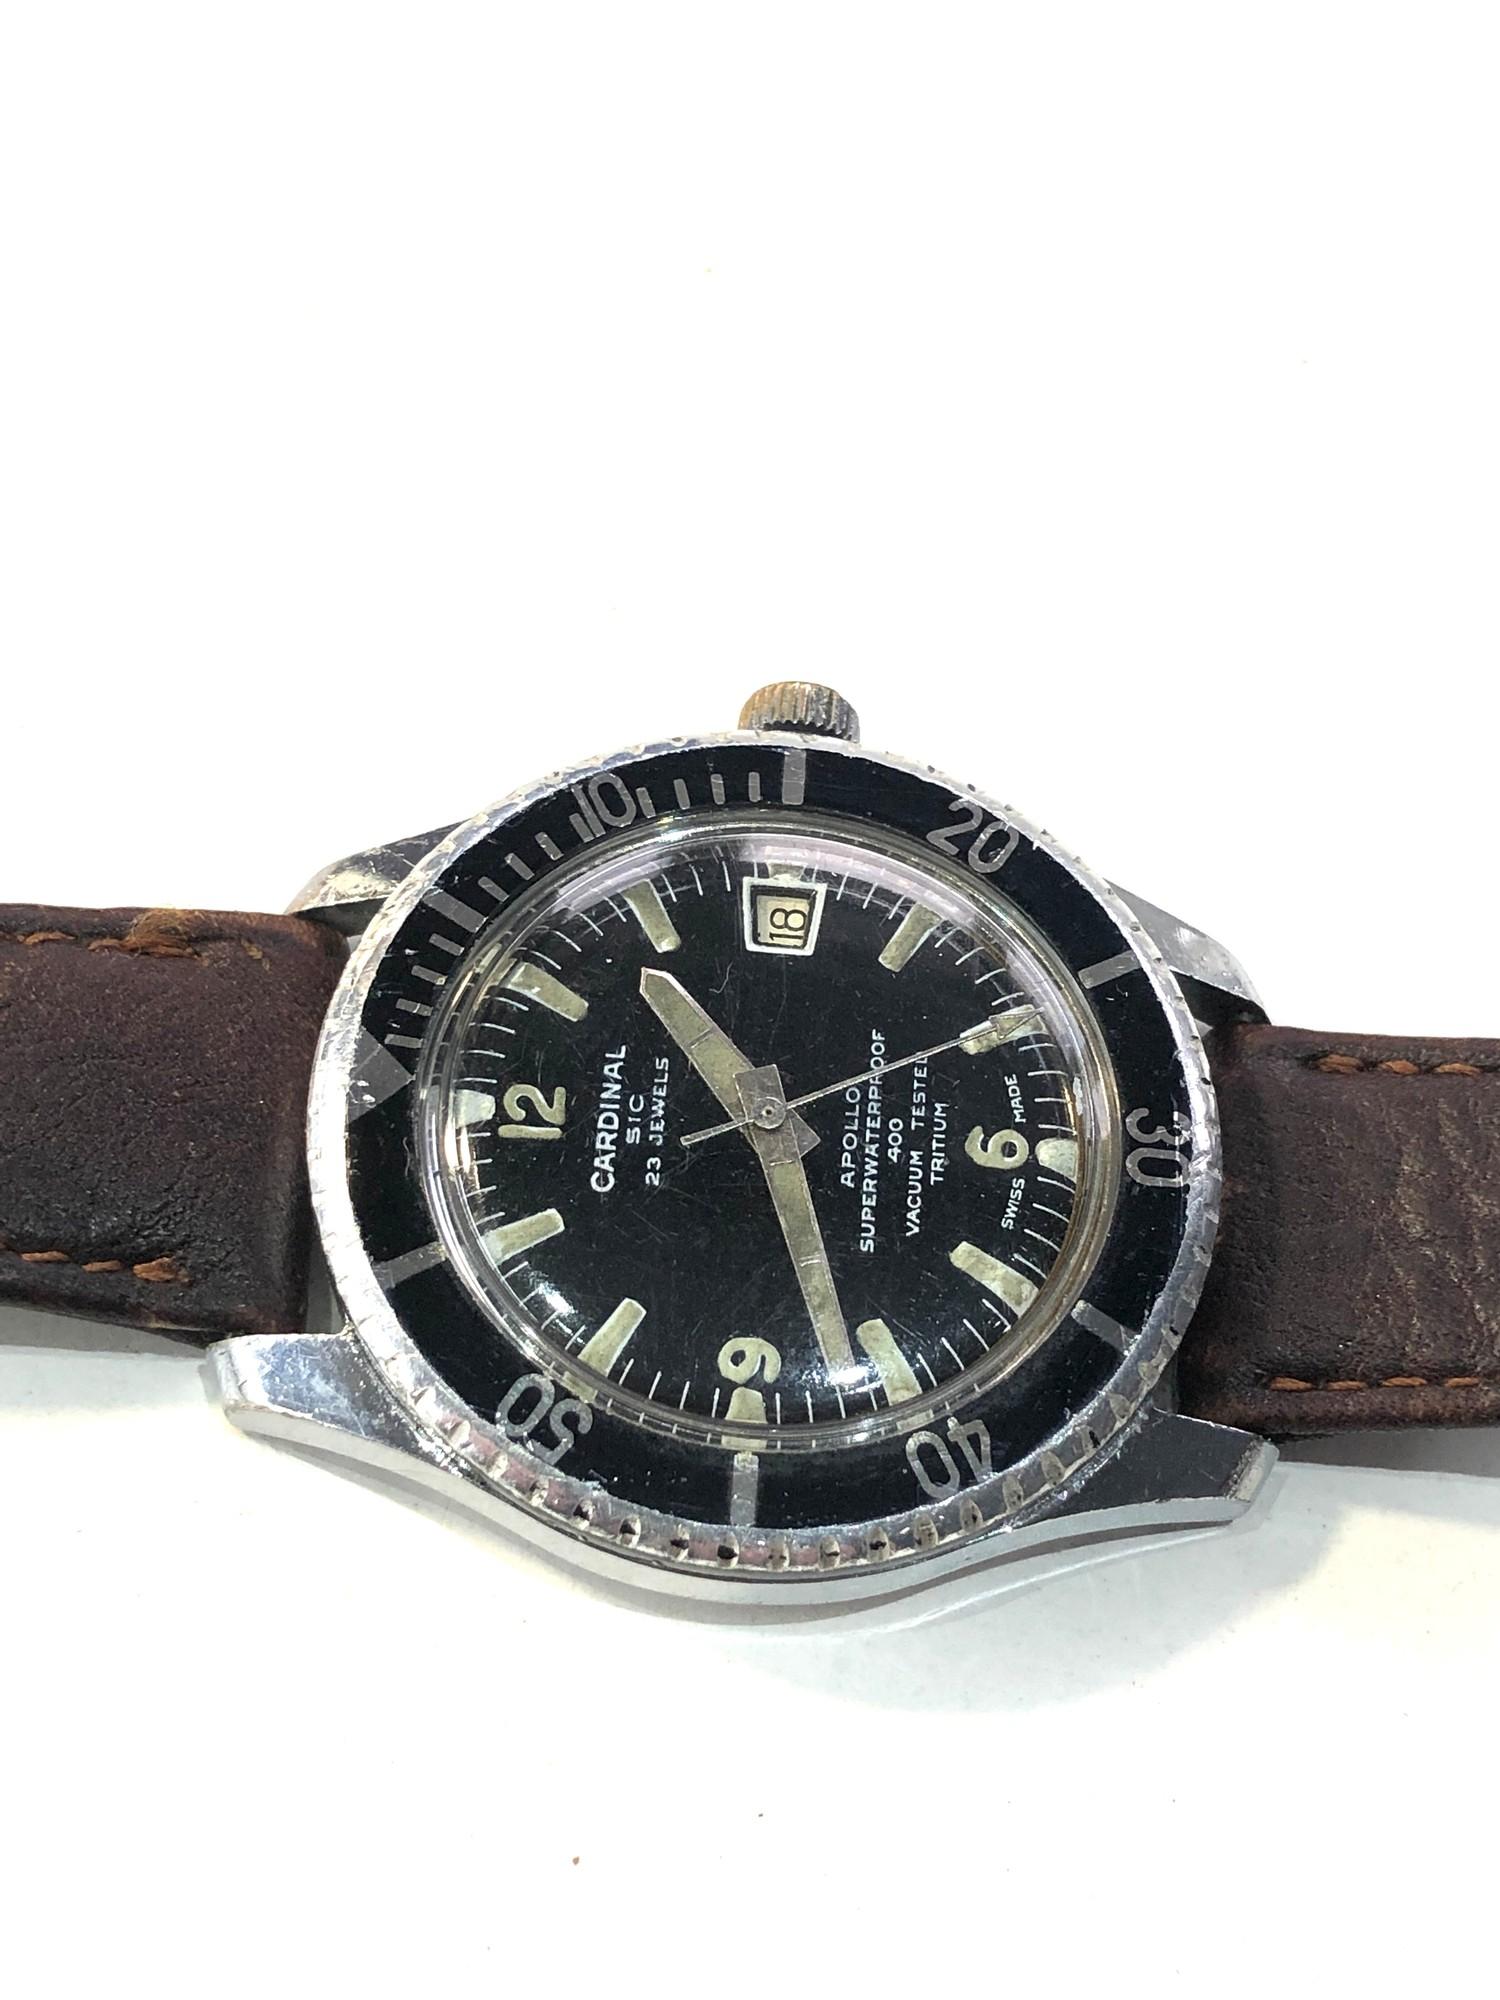 Vintage Cardinal (sic / breitling) 23 jewel apollo 400 diver watch watch is ticking but no - Image 3 of 4